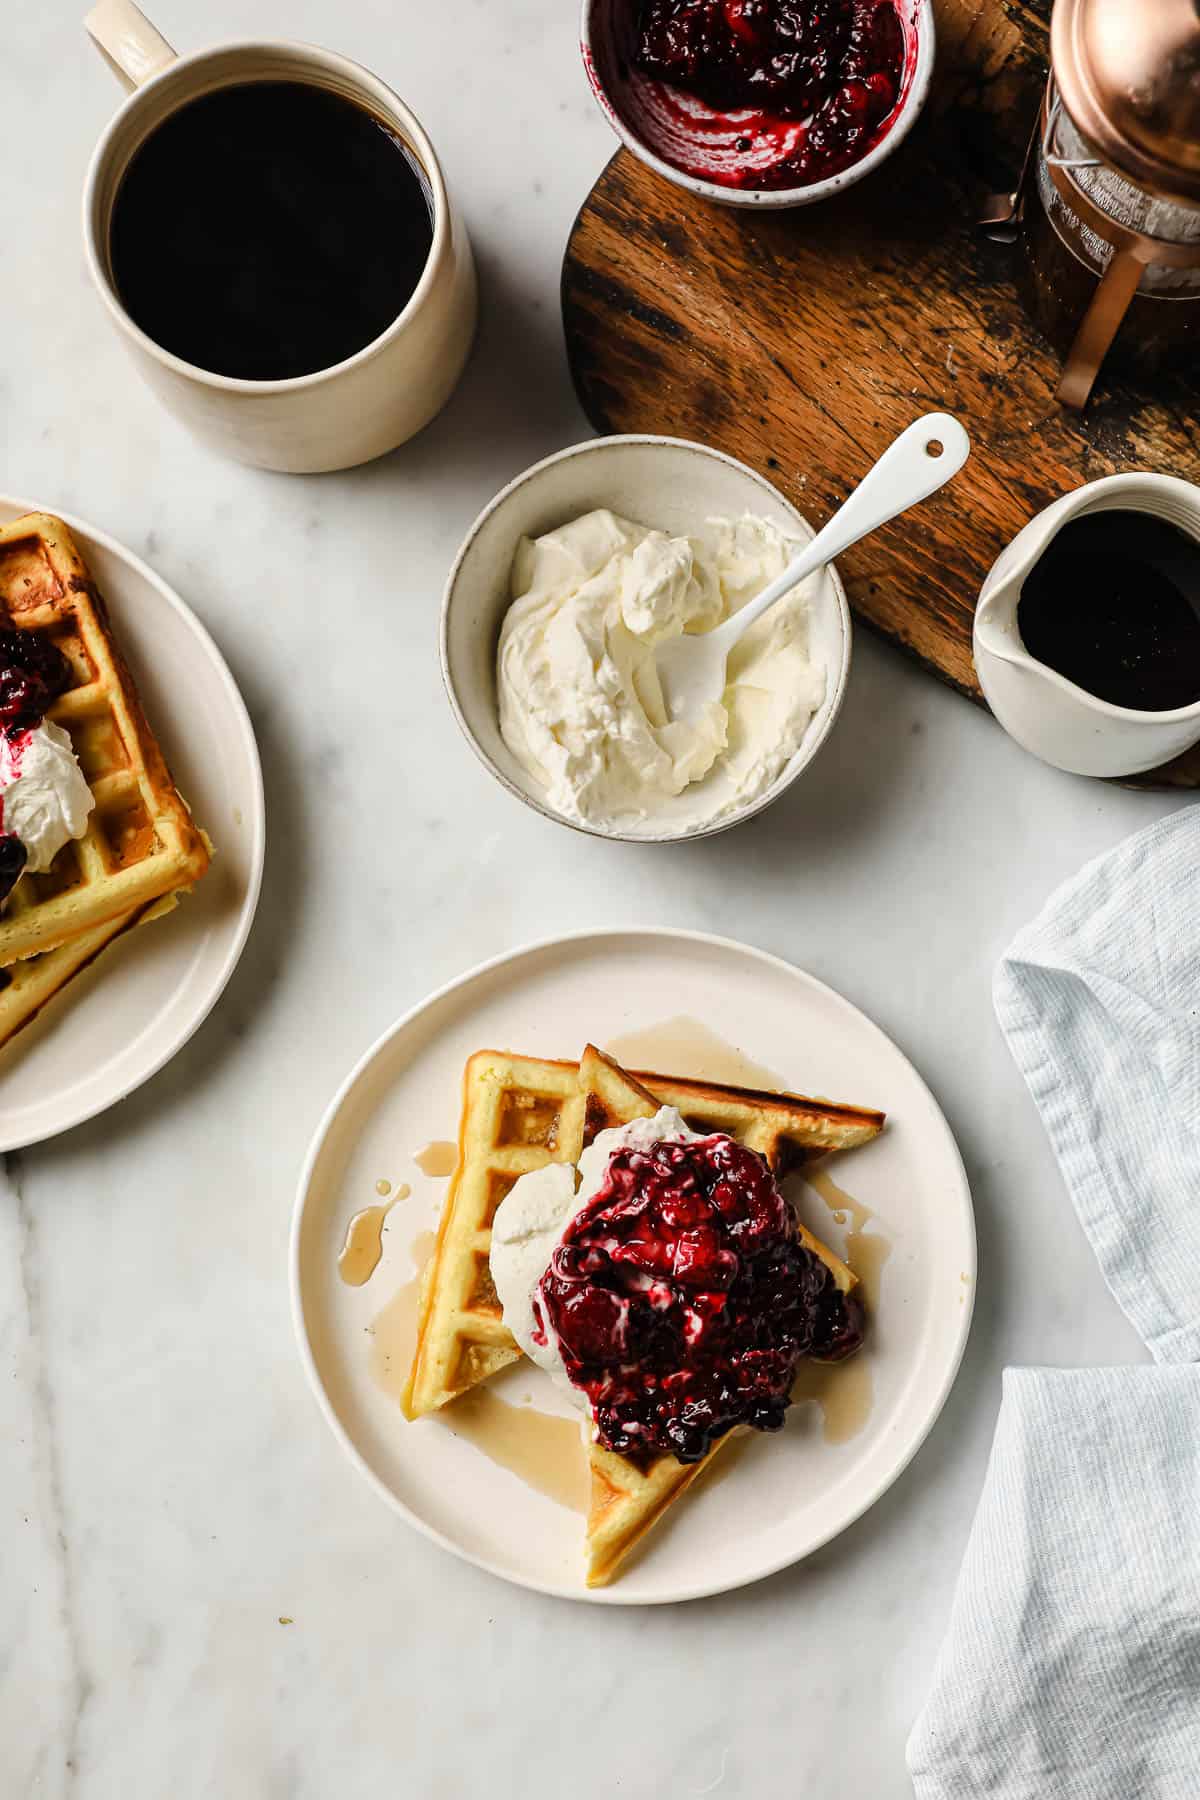 keto waffles topped with syrup, low carb jam, and homemade whipped cream